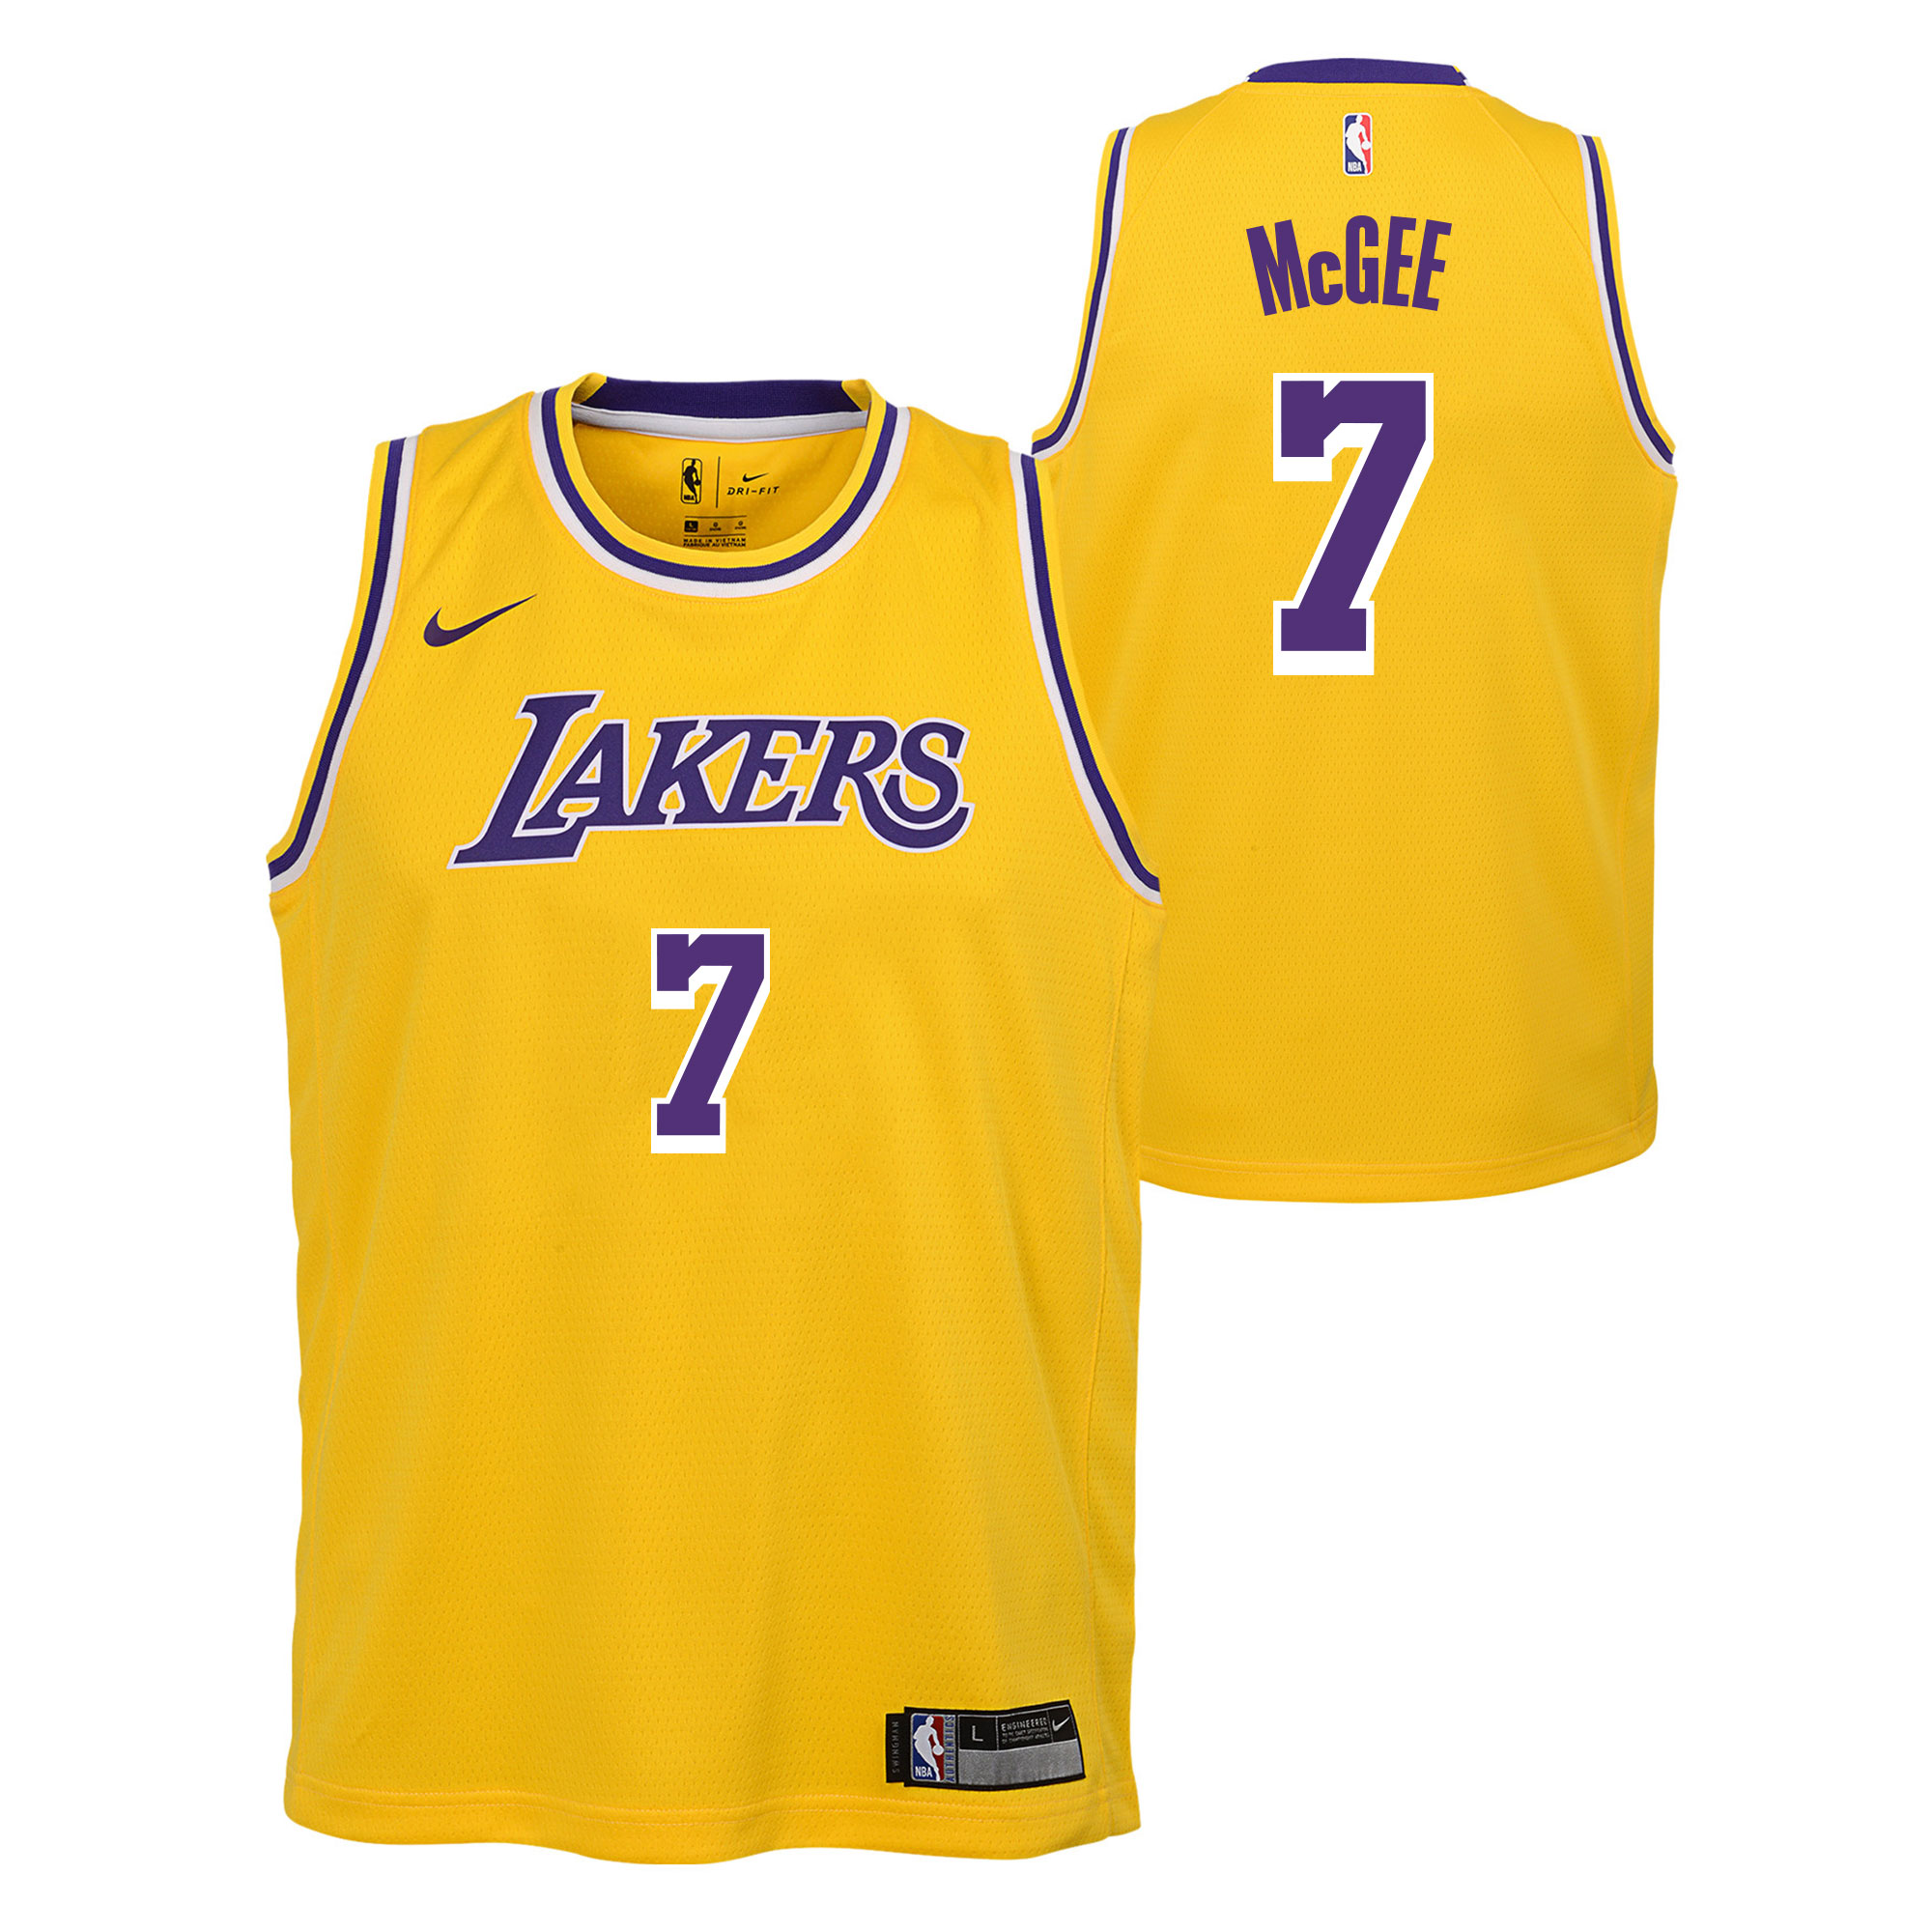 mcgee lakers jersey